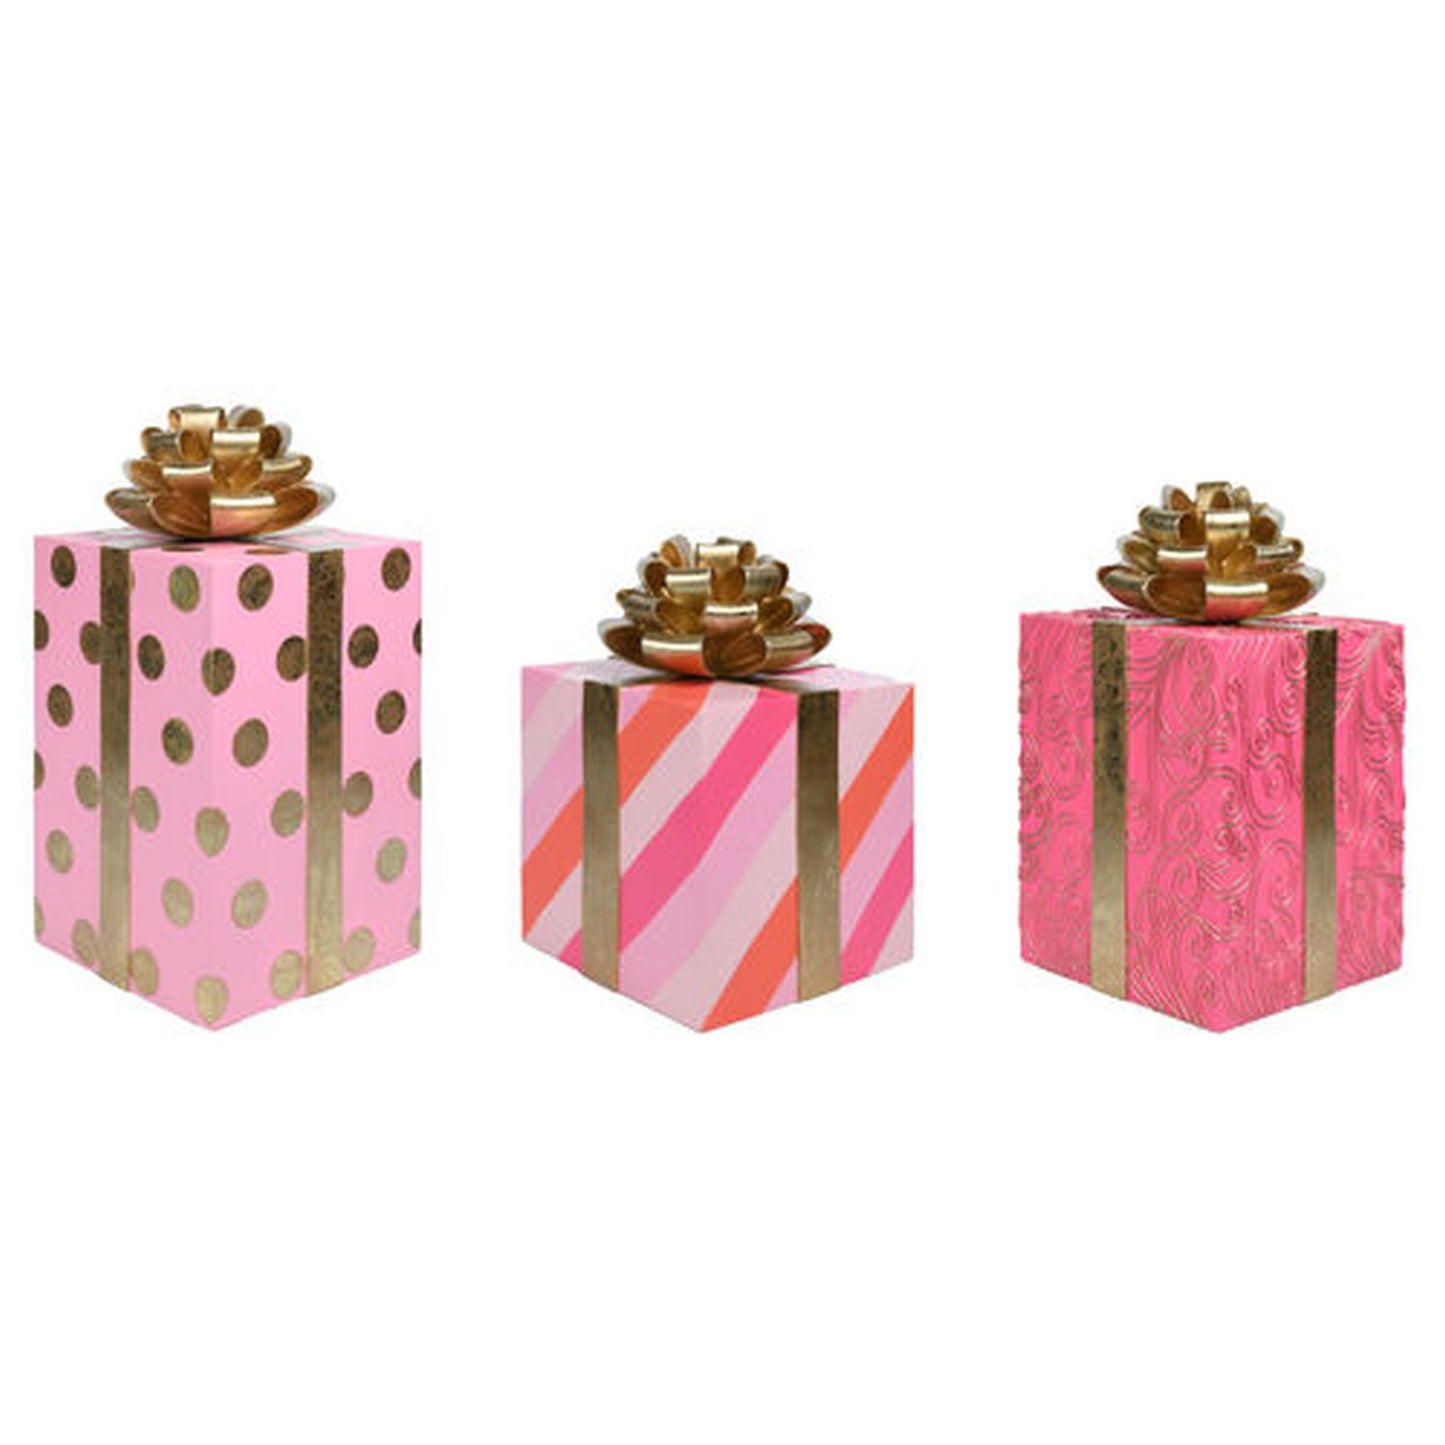 December Diamonds Pink Christmas Set Of 3 Pink/Gold Gift Boxes Display Figurines